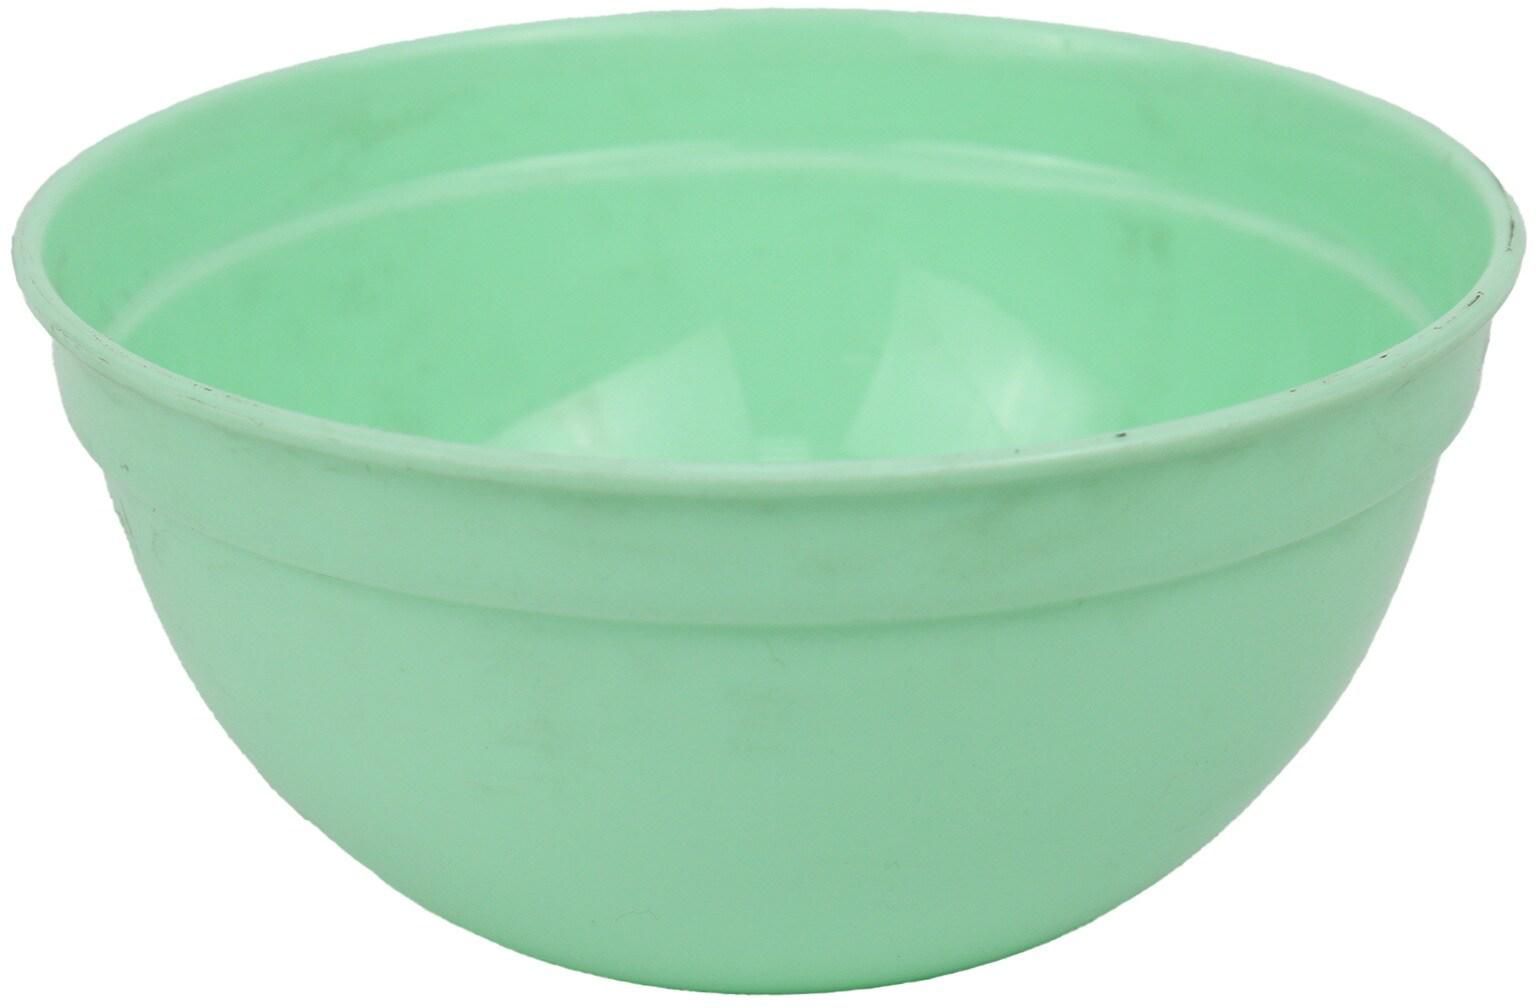 Heroplast Rounded Bowl - 14cm - Small